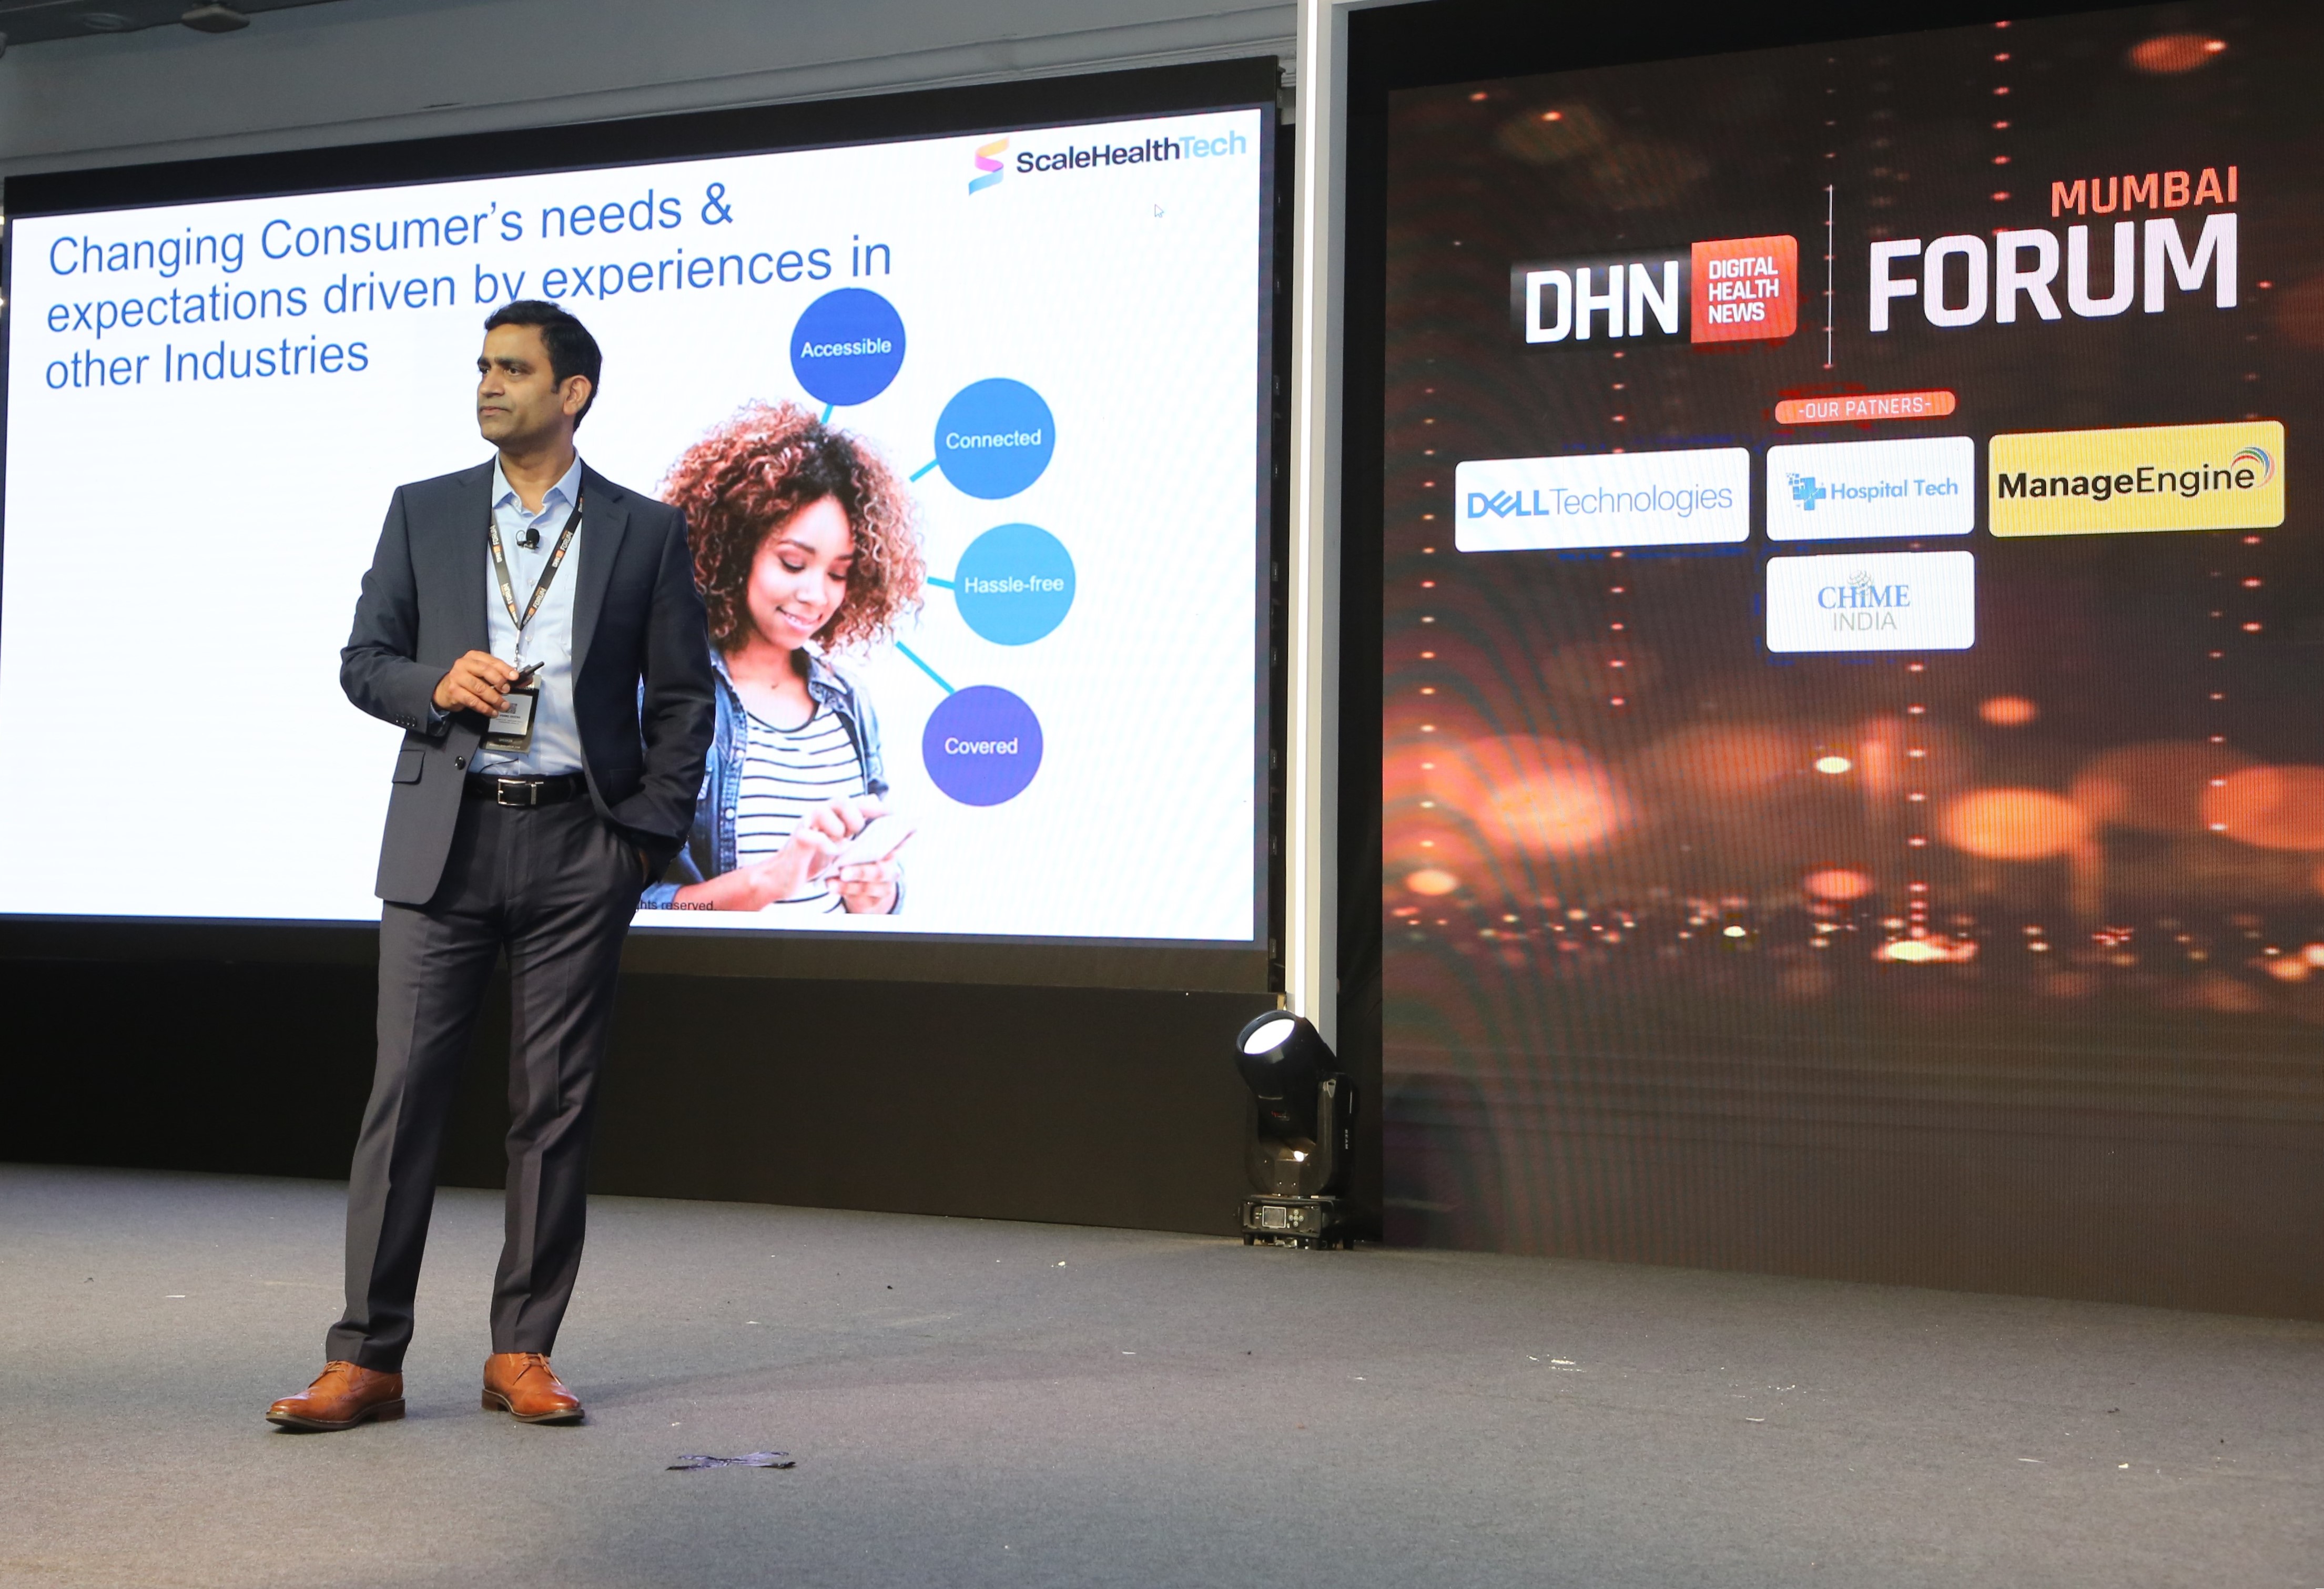 first-hand-account-of-inventing-a-digital-health-transformation-strategy-from-vishnu-saxena-founder-ceo-dhn